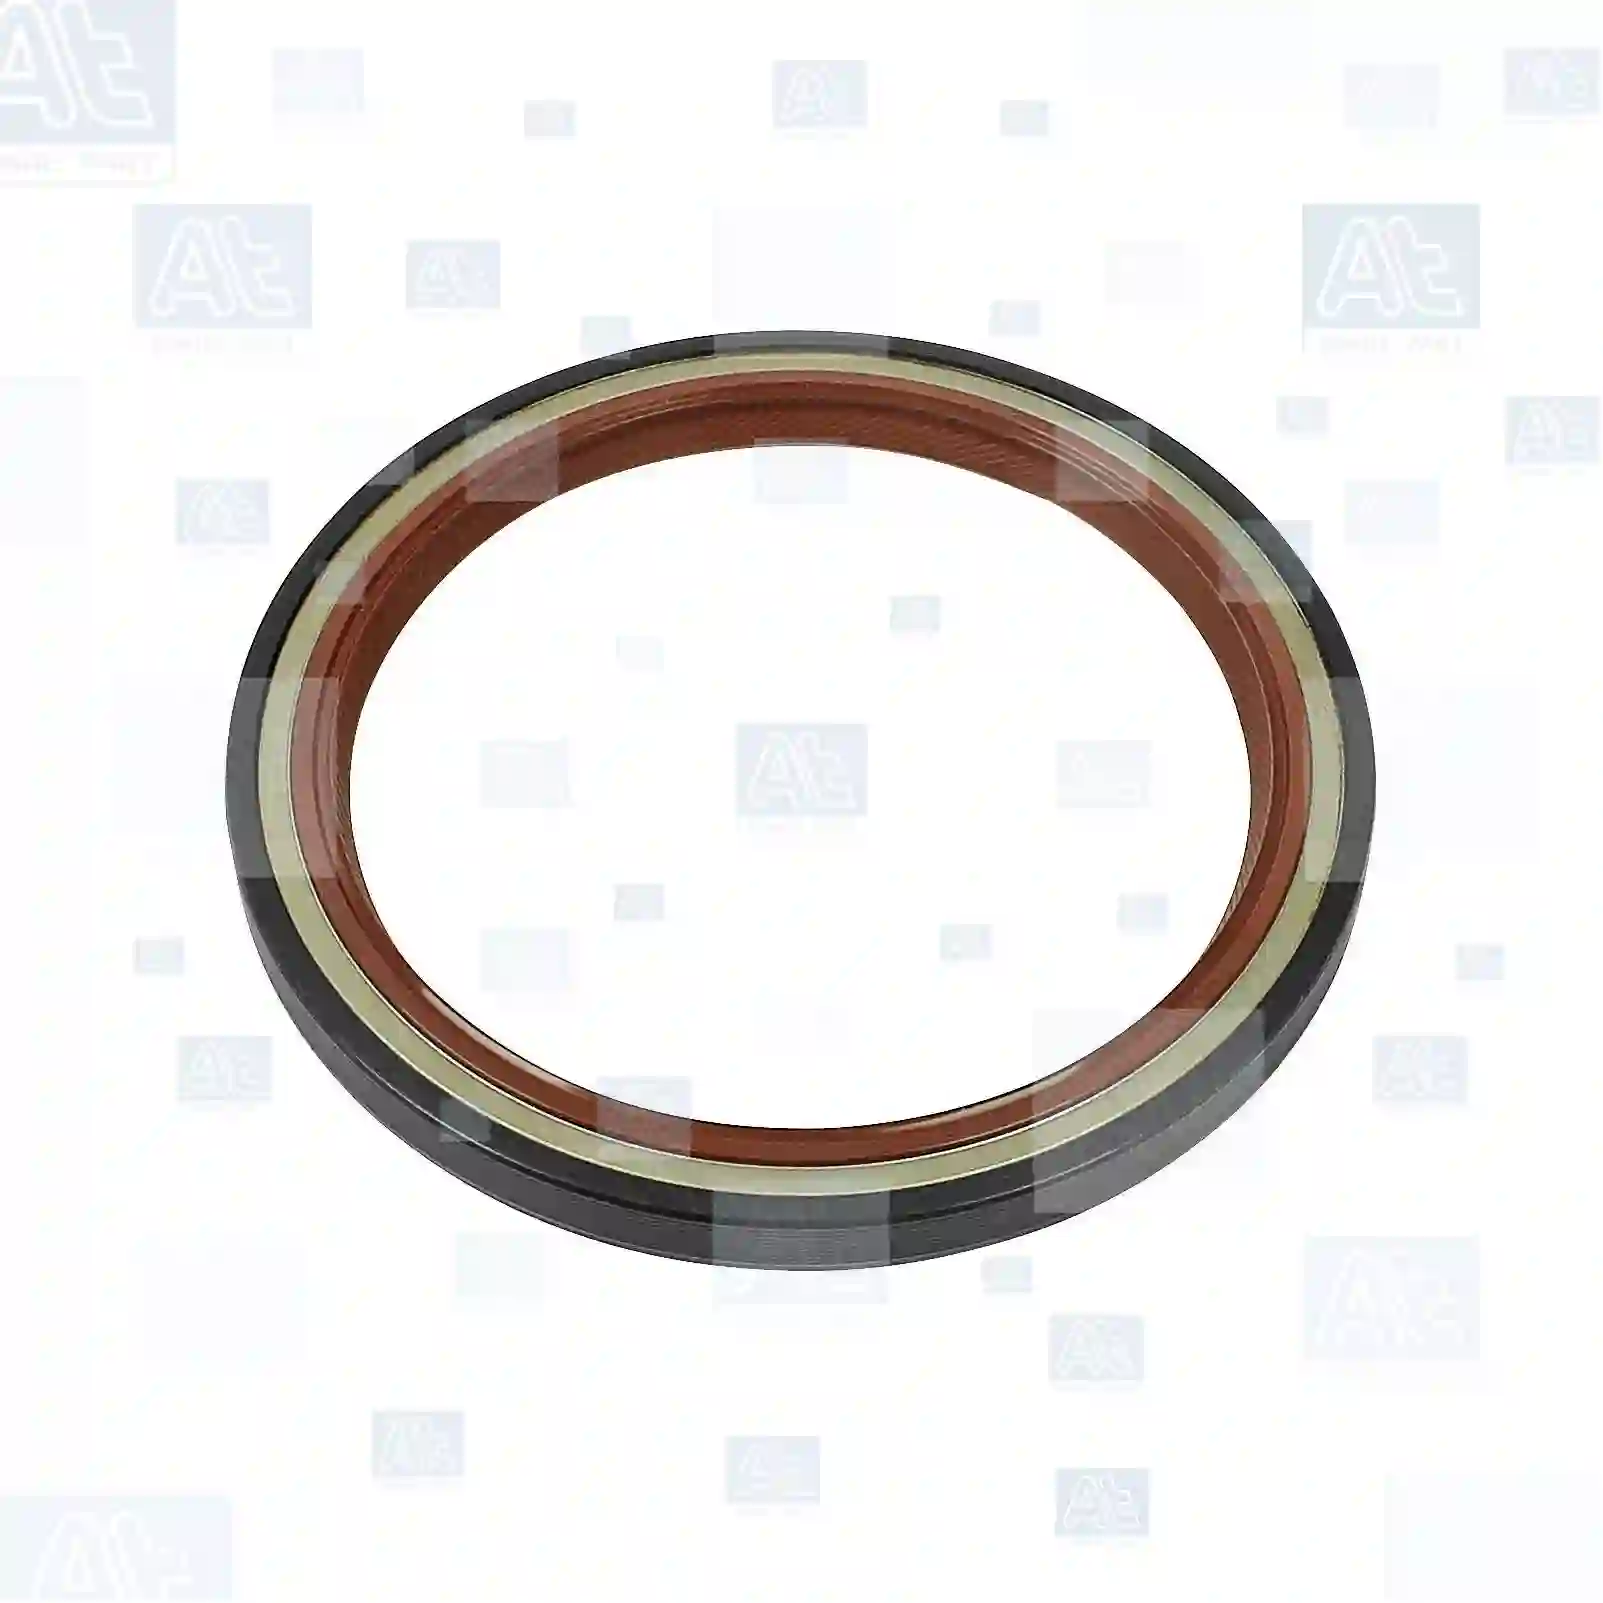 Oil seal, 77700816, 55229956, 9653528580, 079103051F, 11117568263, 11117805946, 96521516, 012743, 012749, 051440, 051474, 0514A2, 55229956, 9400127499, 9653528580, 1142360, 9653528580, Y40111312, Y60111312, 11117568263, 11117805946, M287542, 12279-6F900, 12279-6F902, 12279-6F90A, 012743, 012749, 051440, 051474, 0514A2, 95510105300, 7700695940, 7703087190, OZB708511, 16121-73J00, SU001-00530, 079103051F ||  77700816 At Spare Part | Engine, Accelerator Pedal, Camshaft, Connecting Rod, Crankcase, Crankshaft, Cylinder Head, Engine Suspension Mountings, Exhaust Manifold, Exhaust Gas Recirculation, Filter Kits, Flywheel Housing, General Overhaul Kits, Engine, Intake Manifold, Oil Cleaner, Oil Cooler, Oil Filter, Oil Pump, Oil Sump, Piston & Liner, Sensor & Switch, Timing Case, Turbocharger, Cooling System, Belt Tensioner, Coolant Filter, Coolant Pipe, Corrosion Prevention Agent, Drive, Expansion Tank, Fan, Intercooler, Monitors & Gauges, Radiator, Thermostat, V-Belt / Timing belt, Water Pump, Fuel System, Electronical Injector Unit, Feed Pump, Fuel Filter, cpl., Fuel Gauge Sender,  Fuel Line, Fuel Pump, Fuel Tank, Injection Line Kit, Injection Pump, Exhaust System, Clutch & Pedal, Gearbox, Propeller Shaft, Axles, Brake System, Hubs & Wheels, Suspension, Leaf Spring, Universal Parts / Accessories, Steering, Electrical System, Cabin Oil seal, 77700816, 55229956, 9653528580, 079103051F, 11117568263, 11117805946, 96521516, 012743, 012749, 051440, 051474, 0514A2, 55229956, 9400127499, 9653528580, 1142360, 9653528580, Y40111312, Y60111312, 11117568263, 11117805946, M287542, 12279-6F900, 12279-6F902, 12279-6F90A, 012743, 012749, 051440, 051474, 0514A2, 95510105300, 7700695940, 7703087190, OZB708511, 16121-73J00, SU001-00530, 079103051F ||  77700816 At Spare Part | Engine, Accelerator Pedal, Camshaft, Connecting Rod, Crankcase, Crankshaft, Cylinder Head, Engine Suspension Mountings, Exhaust Manifold, Exhaust Gas Recirculation, Filter Kits, Flywheel Housing, General Overhaul Kits, Engine, Intake Manifold, Oil Cleaner, Oil Cooler, Oil Filter, Oil Pump, Oil Sump, Piston & Liner, Sensor & Switch, Timing Case, Turbocharger, Cooling System, Belt Tensioner, Coolant Filter, Coolant Pipe, Corrosion Prevention Agent, Drive, Expansion Tank, Fan, Intercooler, Monitors & Gauges, Radiator, Thermostat, V-Belt / Timing belt, Water Pump, Fuel System, Electronical Injector Unit, Feed Pump, Fuel Filter, cpl., Fuel Gauge Sender,  Fuel Line, Fuel Pump, Fuel Tank, Injection Line Kit, Injection Pump, Exhaust System, Clutch & Pedal, Gearbox, Propeller Shaft, Axles, Brake System, Hubs & Wheels, Suspension, Leaf Spring, Universal Parts / Accessories, Steering, Electrical System, Cabin